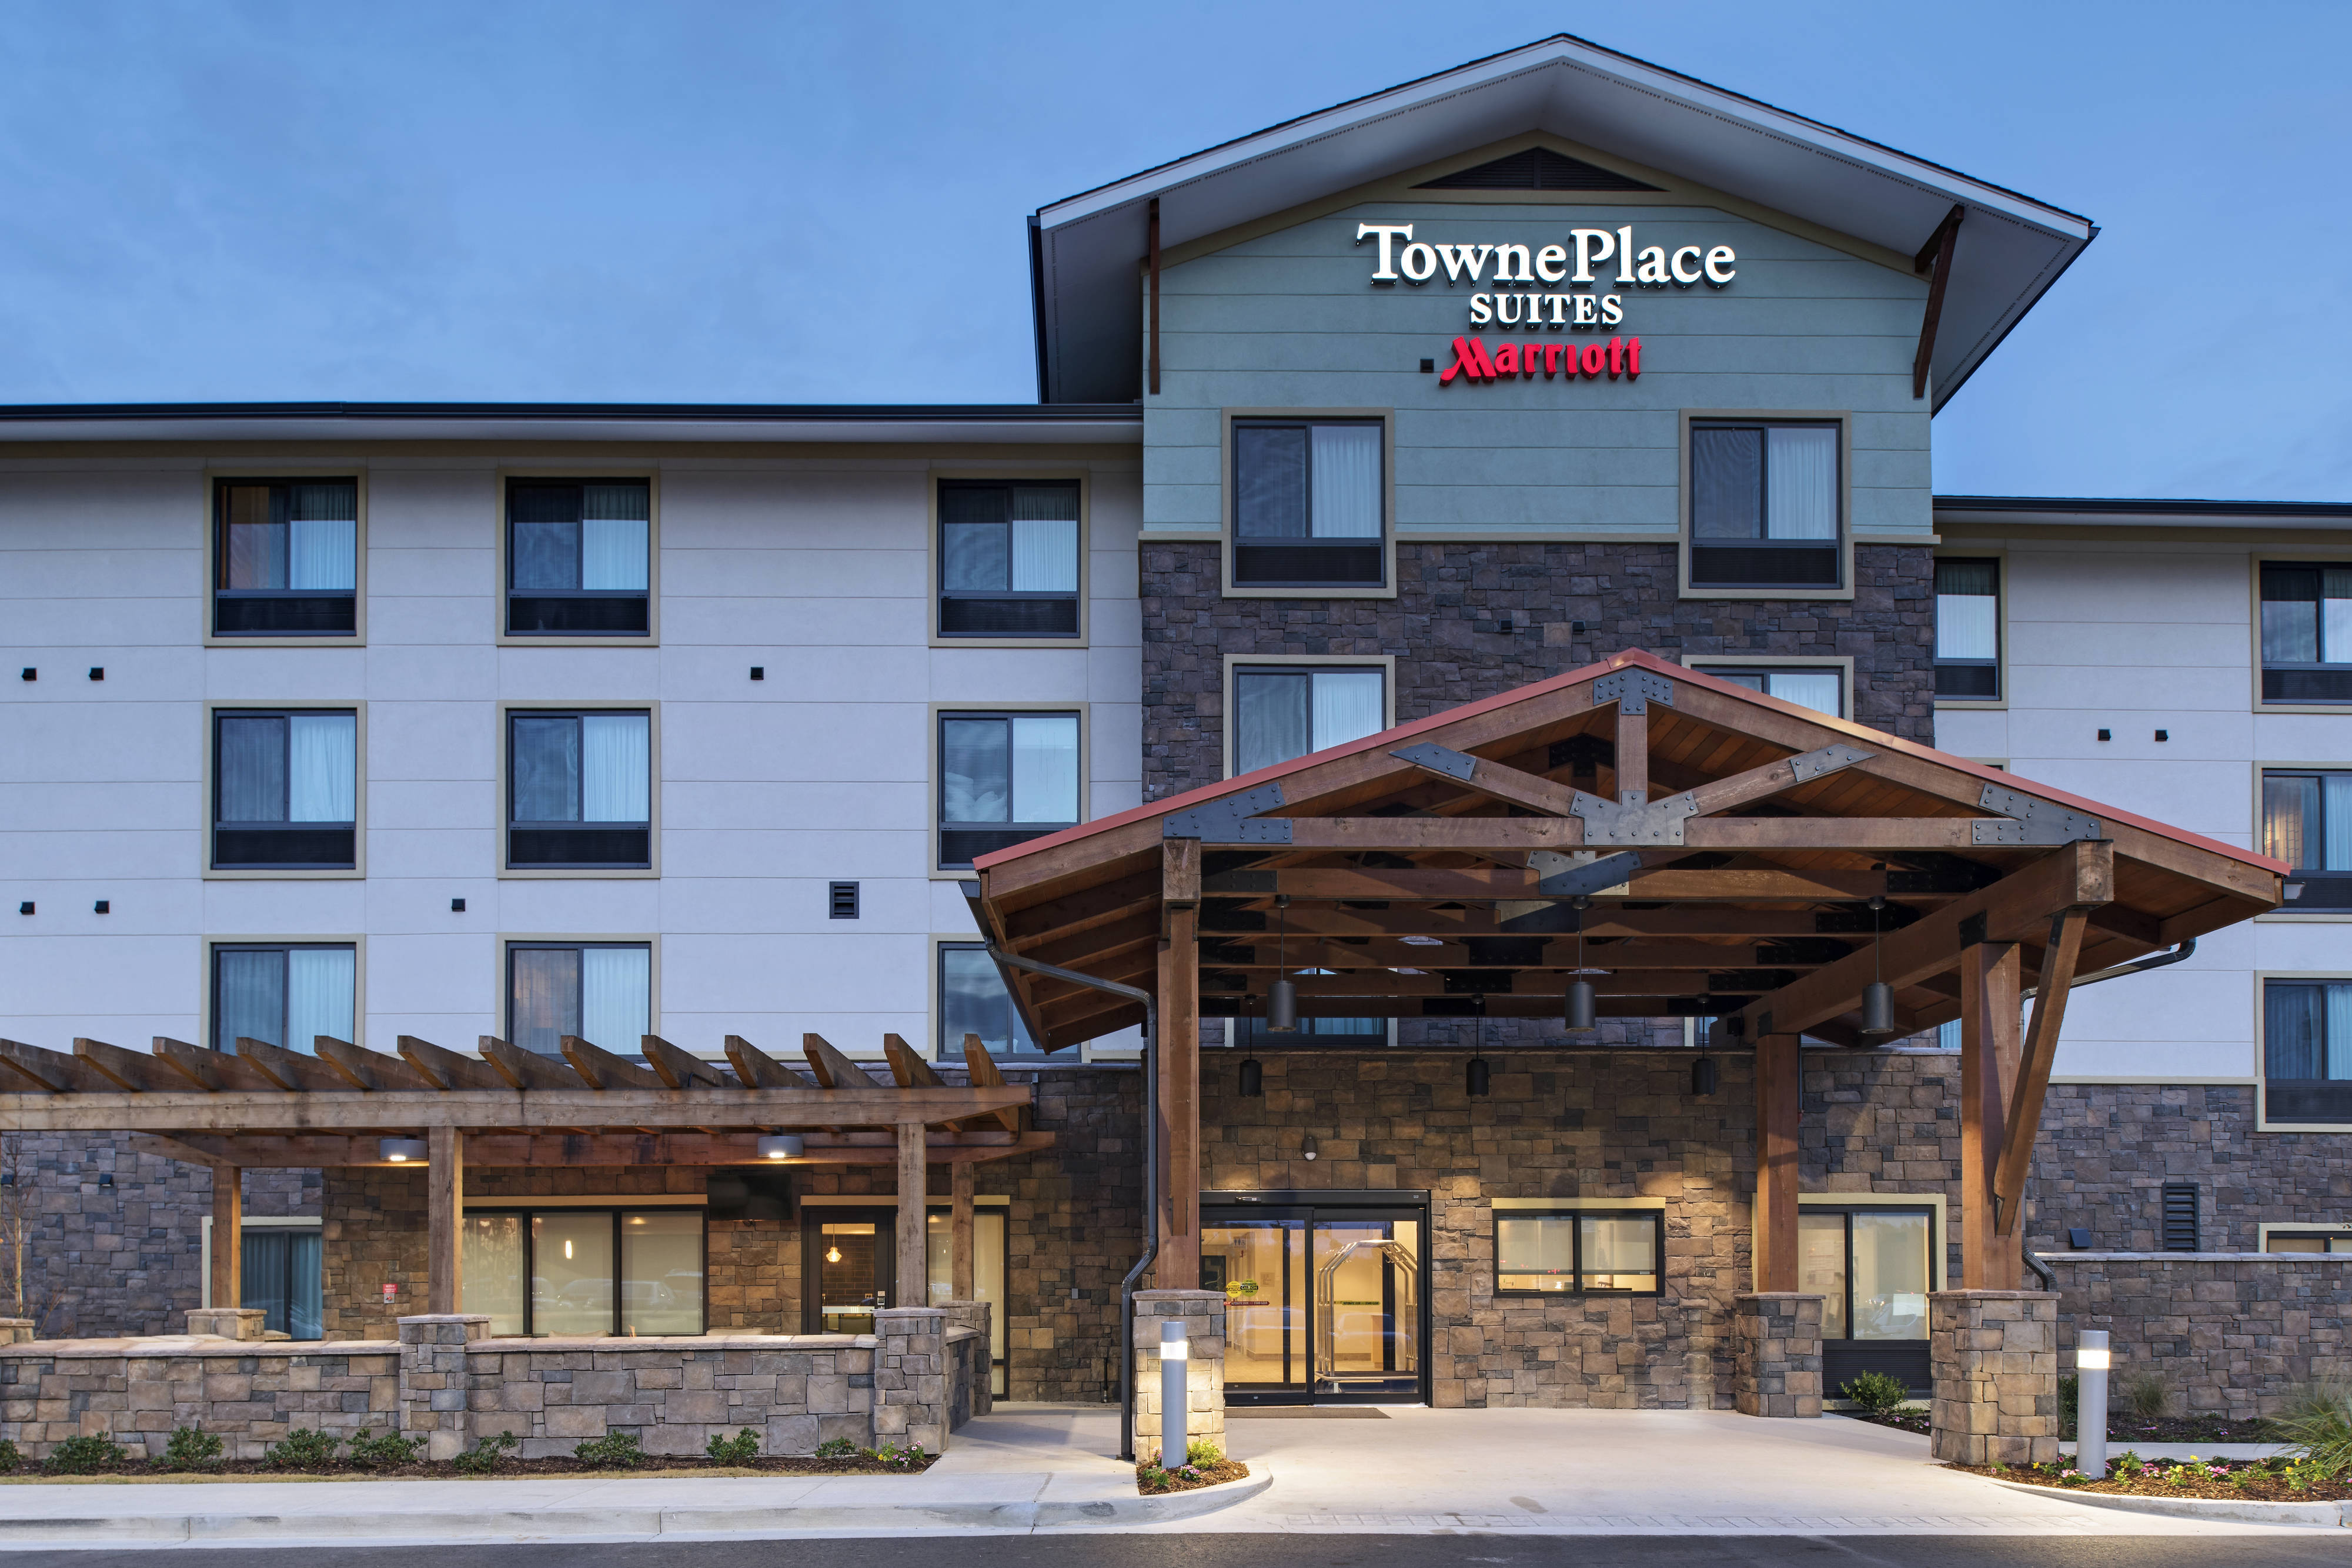 Photo of TownePlace Suites Slidell, Slidell, LA